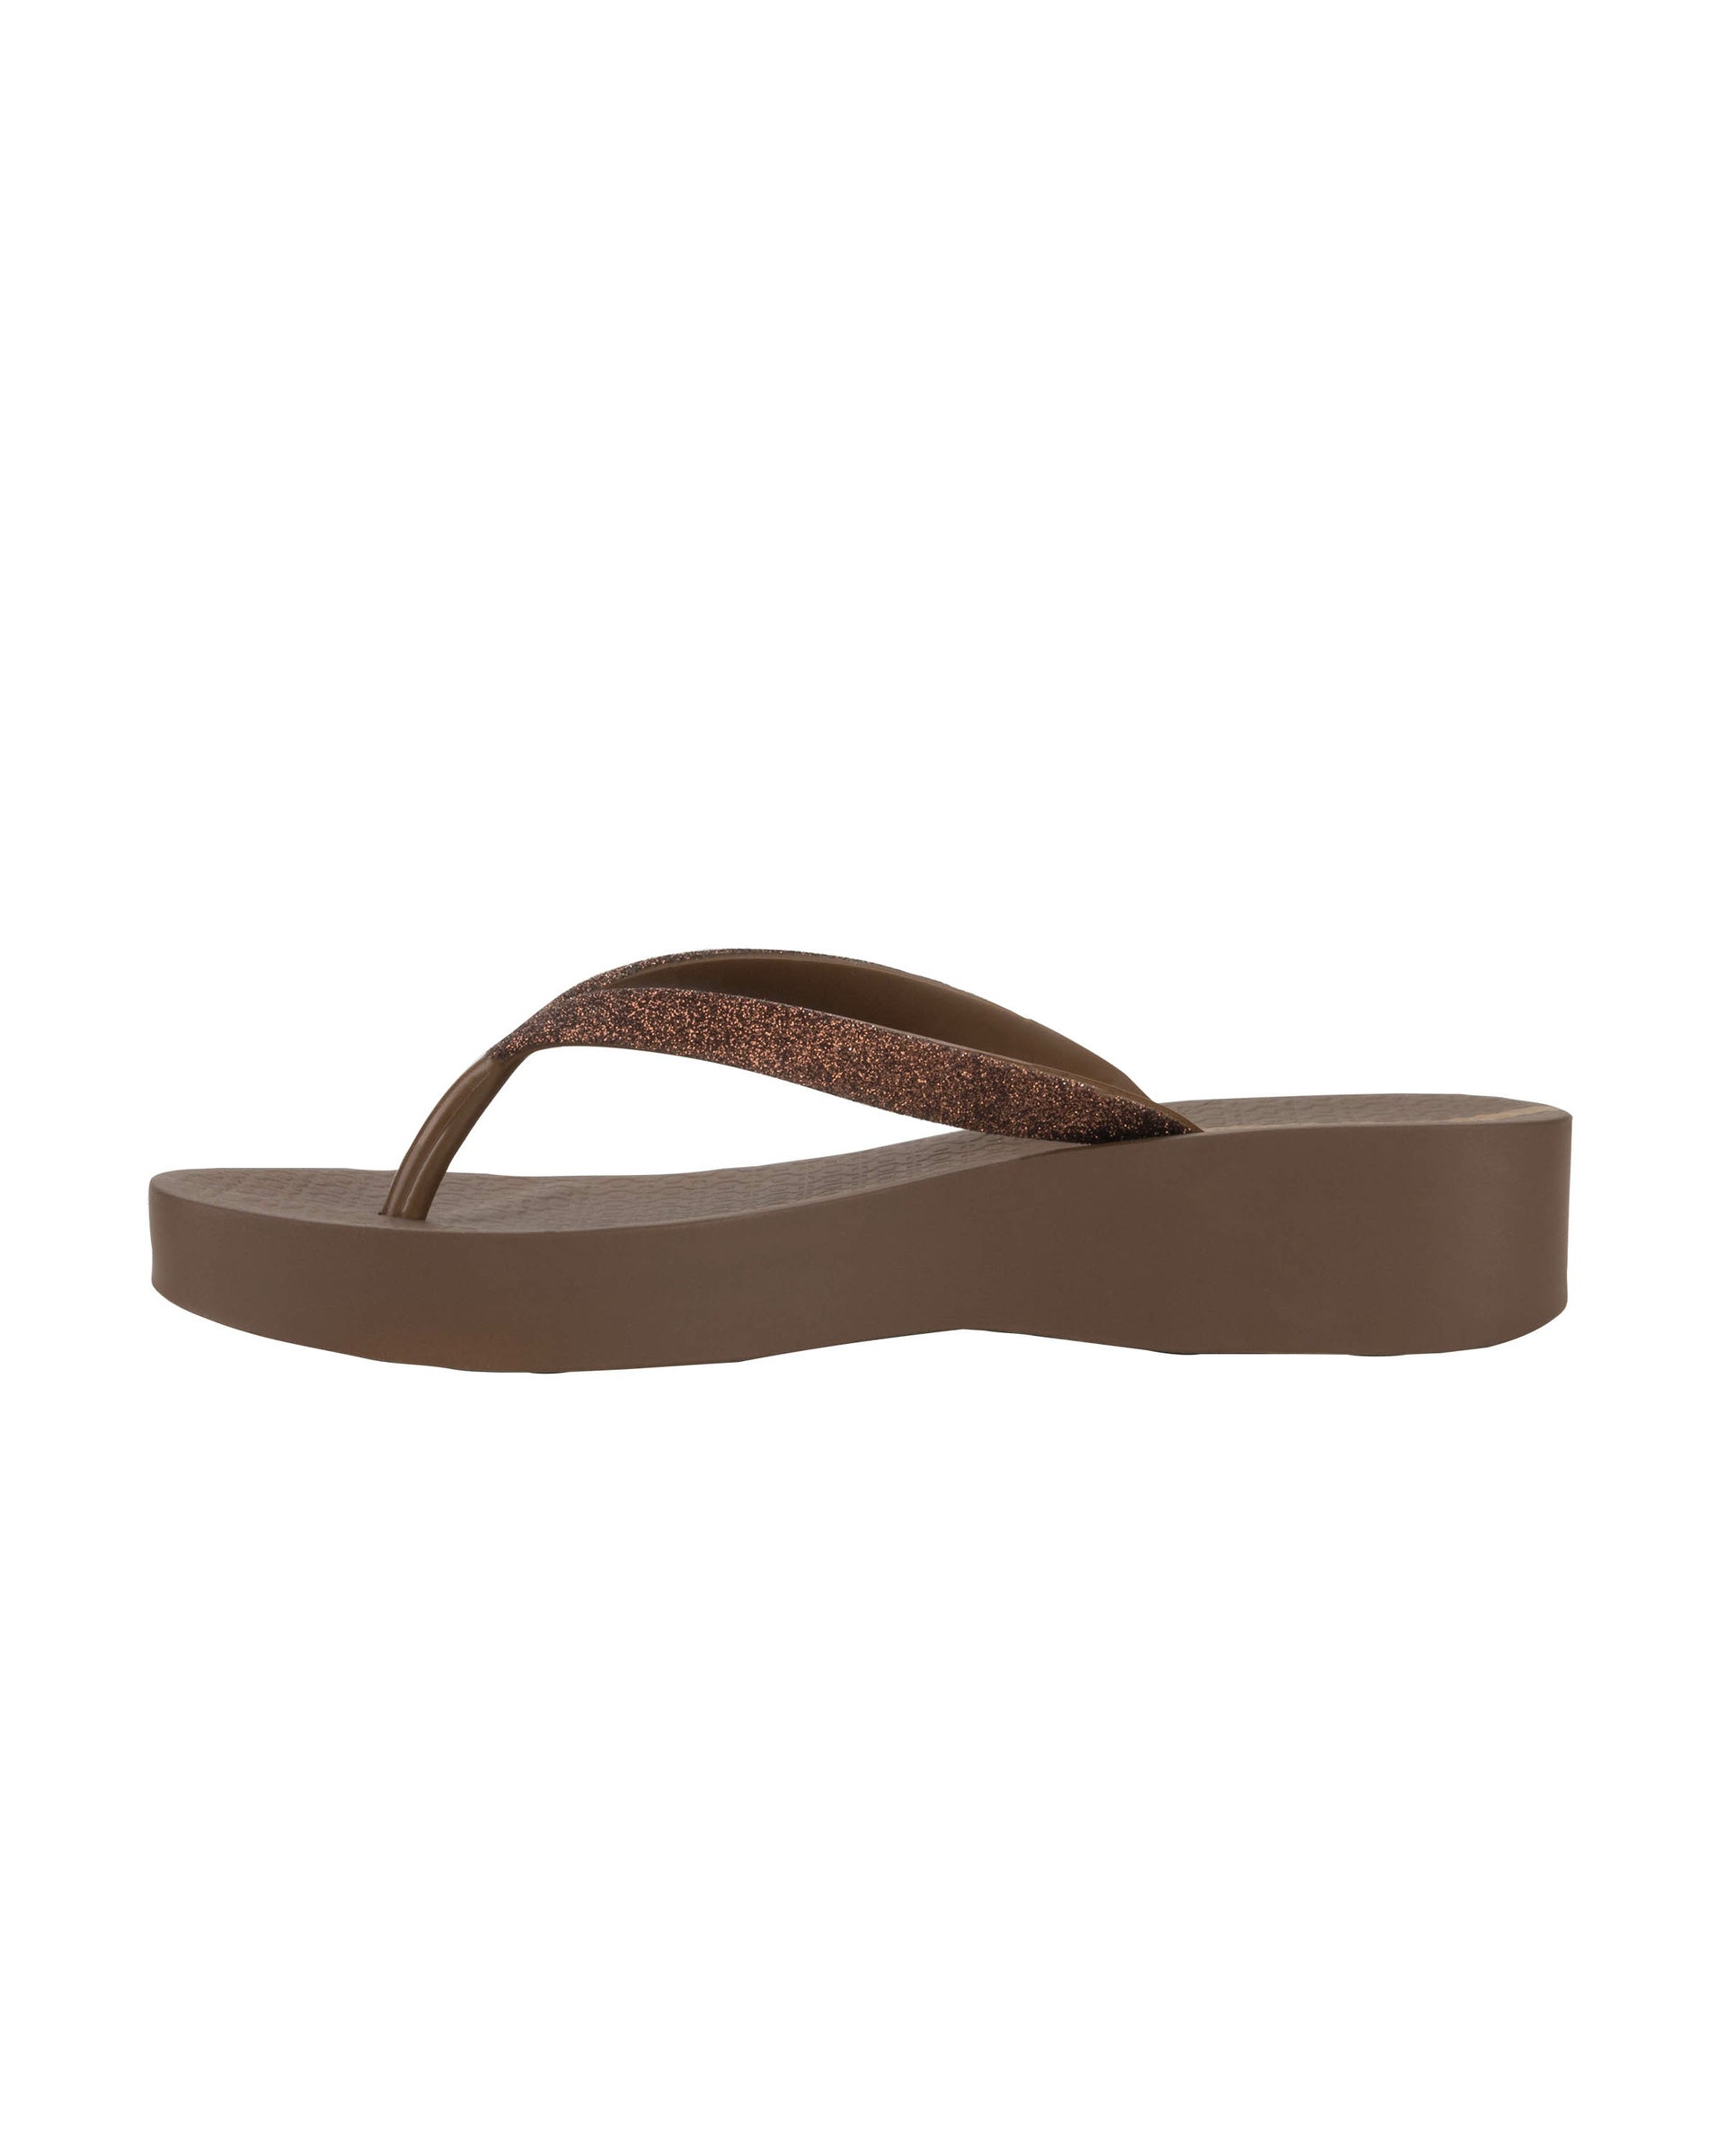 Inner side view of a brown Ipanema Mesh Chic women's wedge flip flop with glitter brown straps.